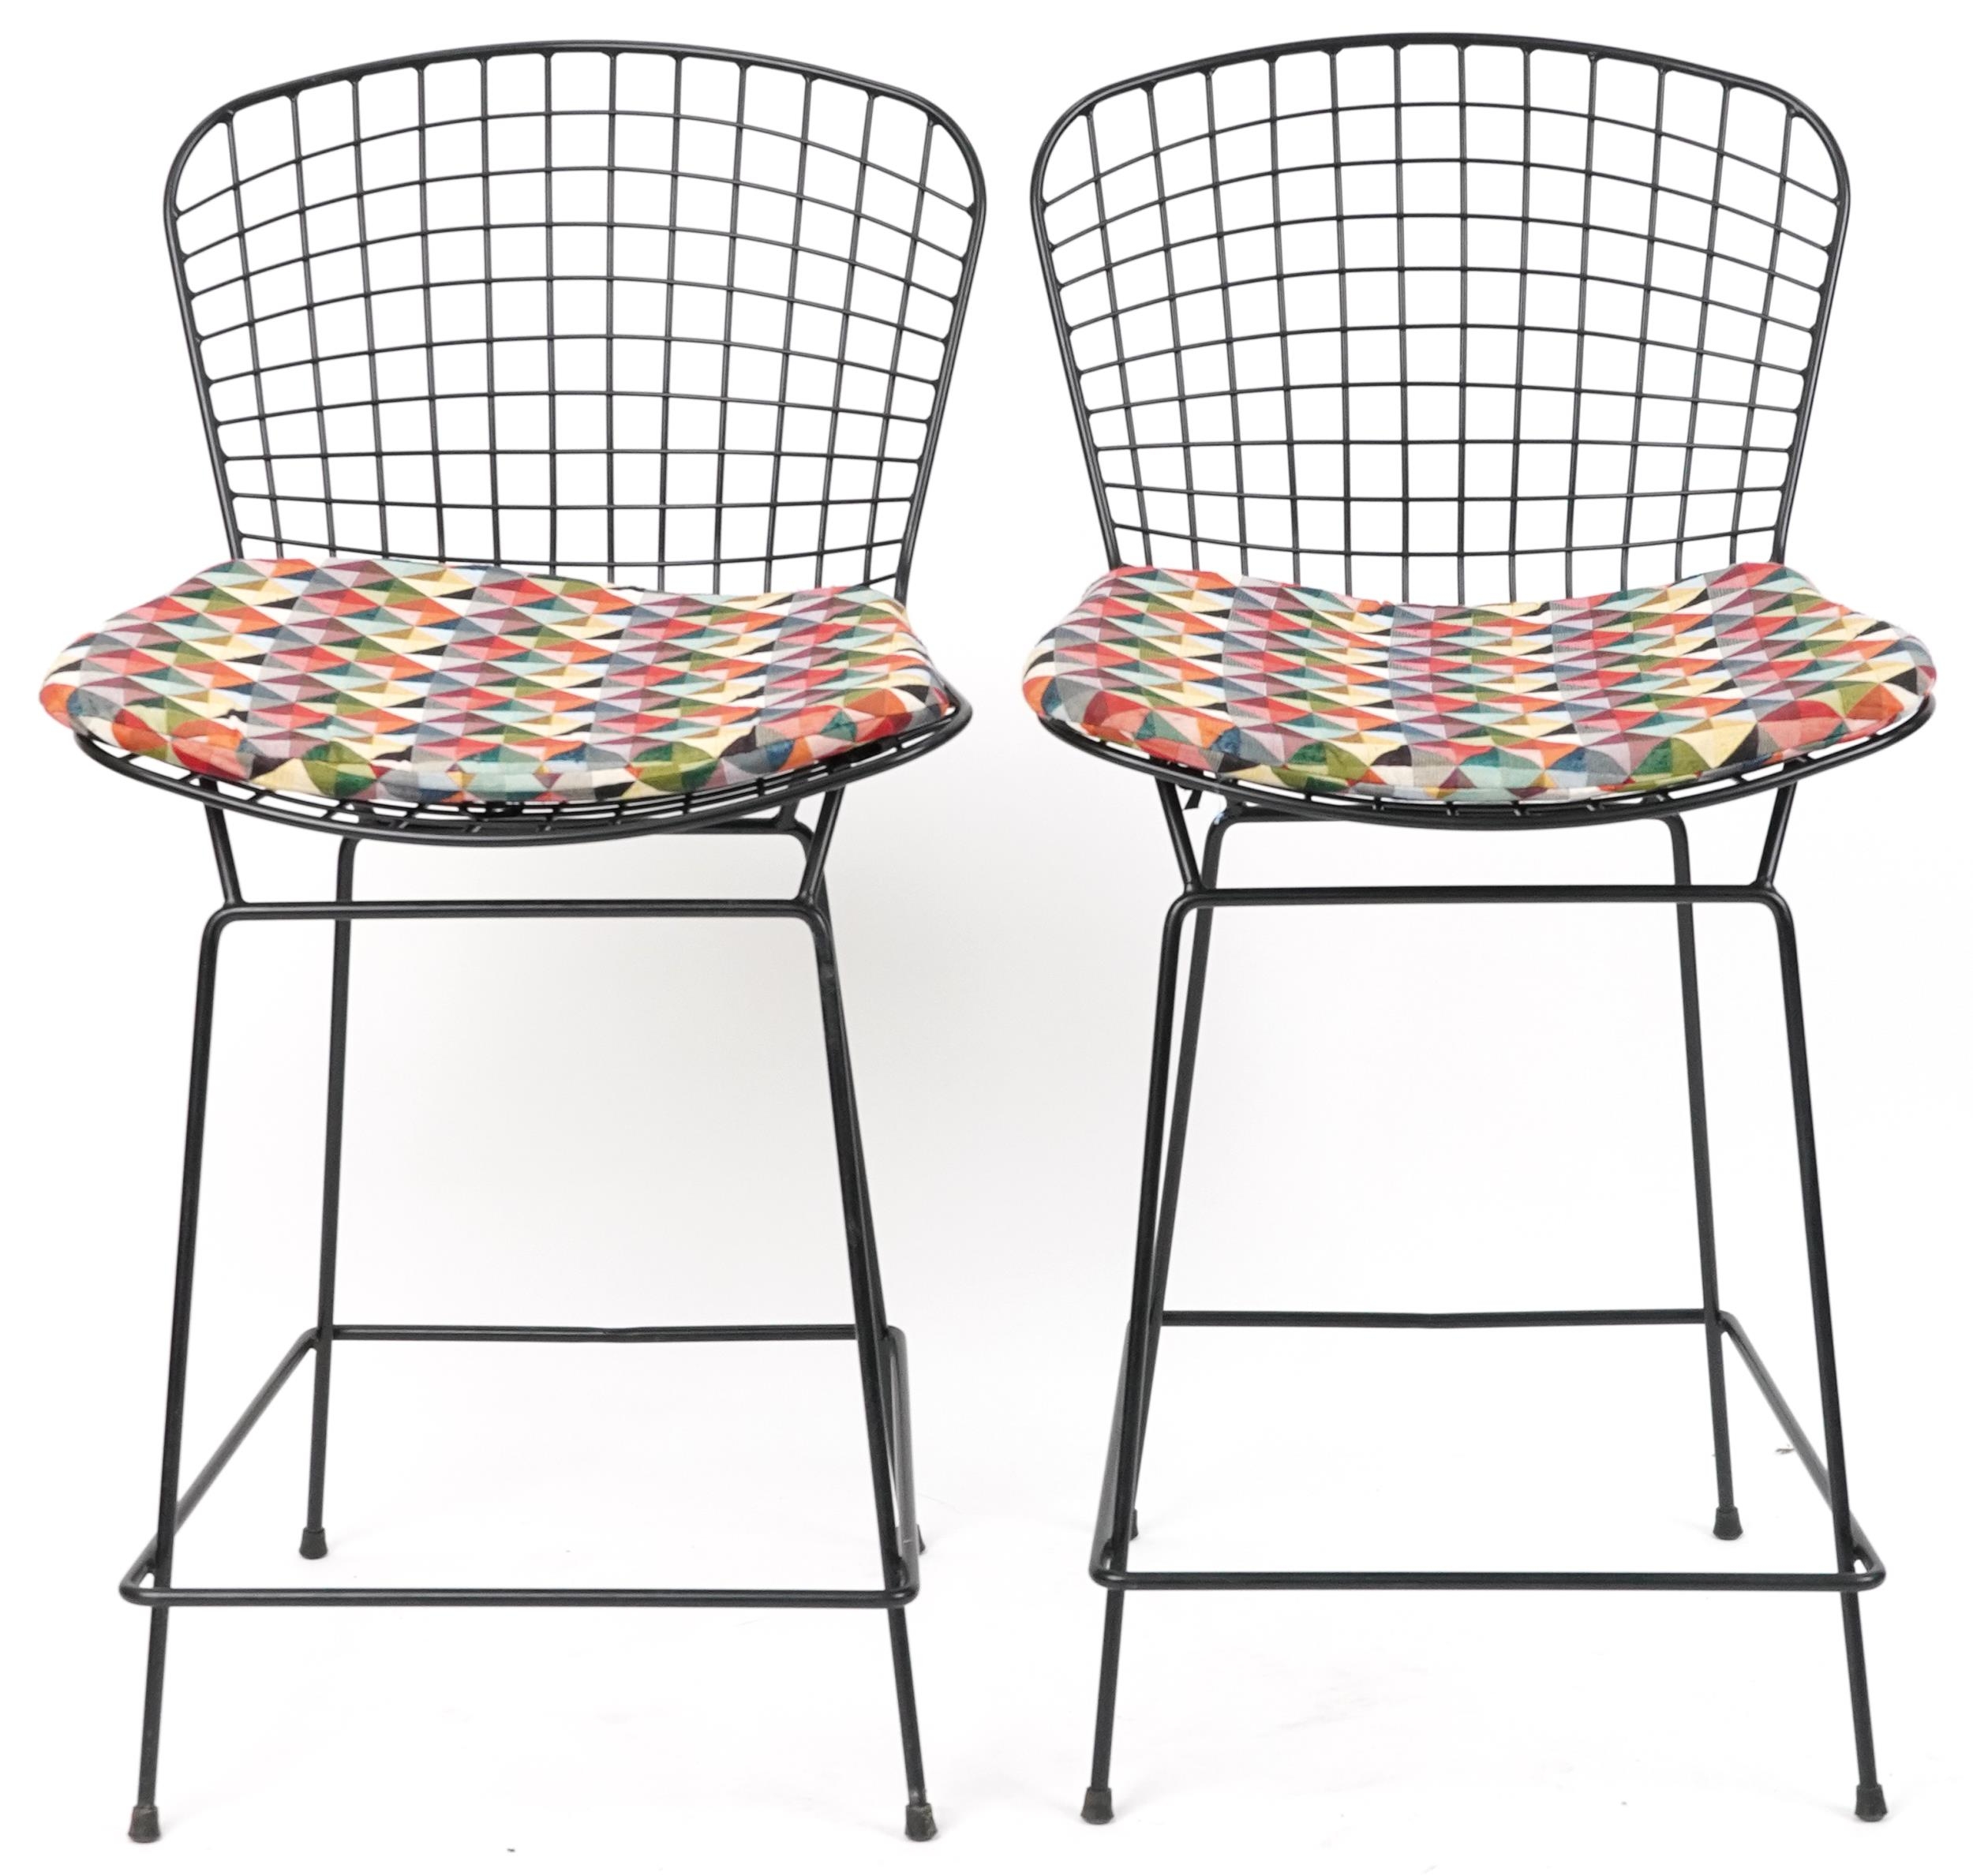 Harry Bertoia, manner of Knoll, pair of metal barstools with cushioned seats, each 99cm high - Image 2 of 5